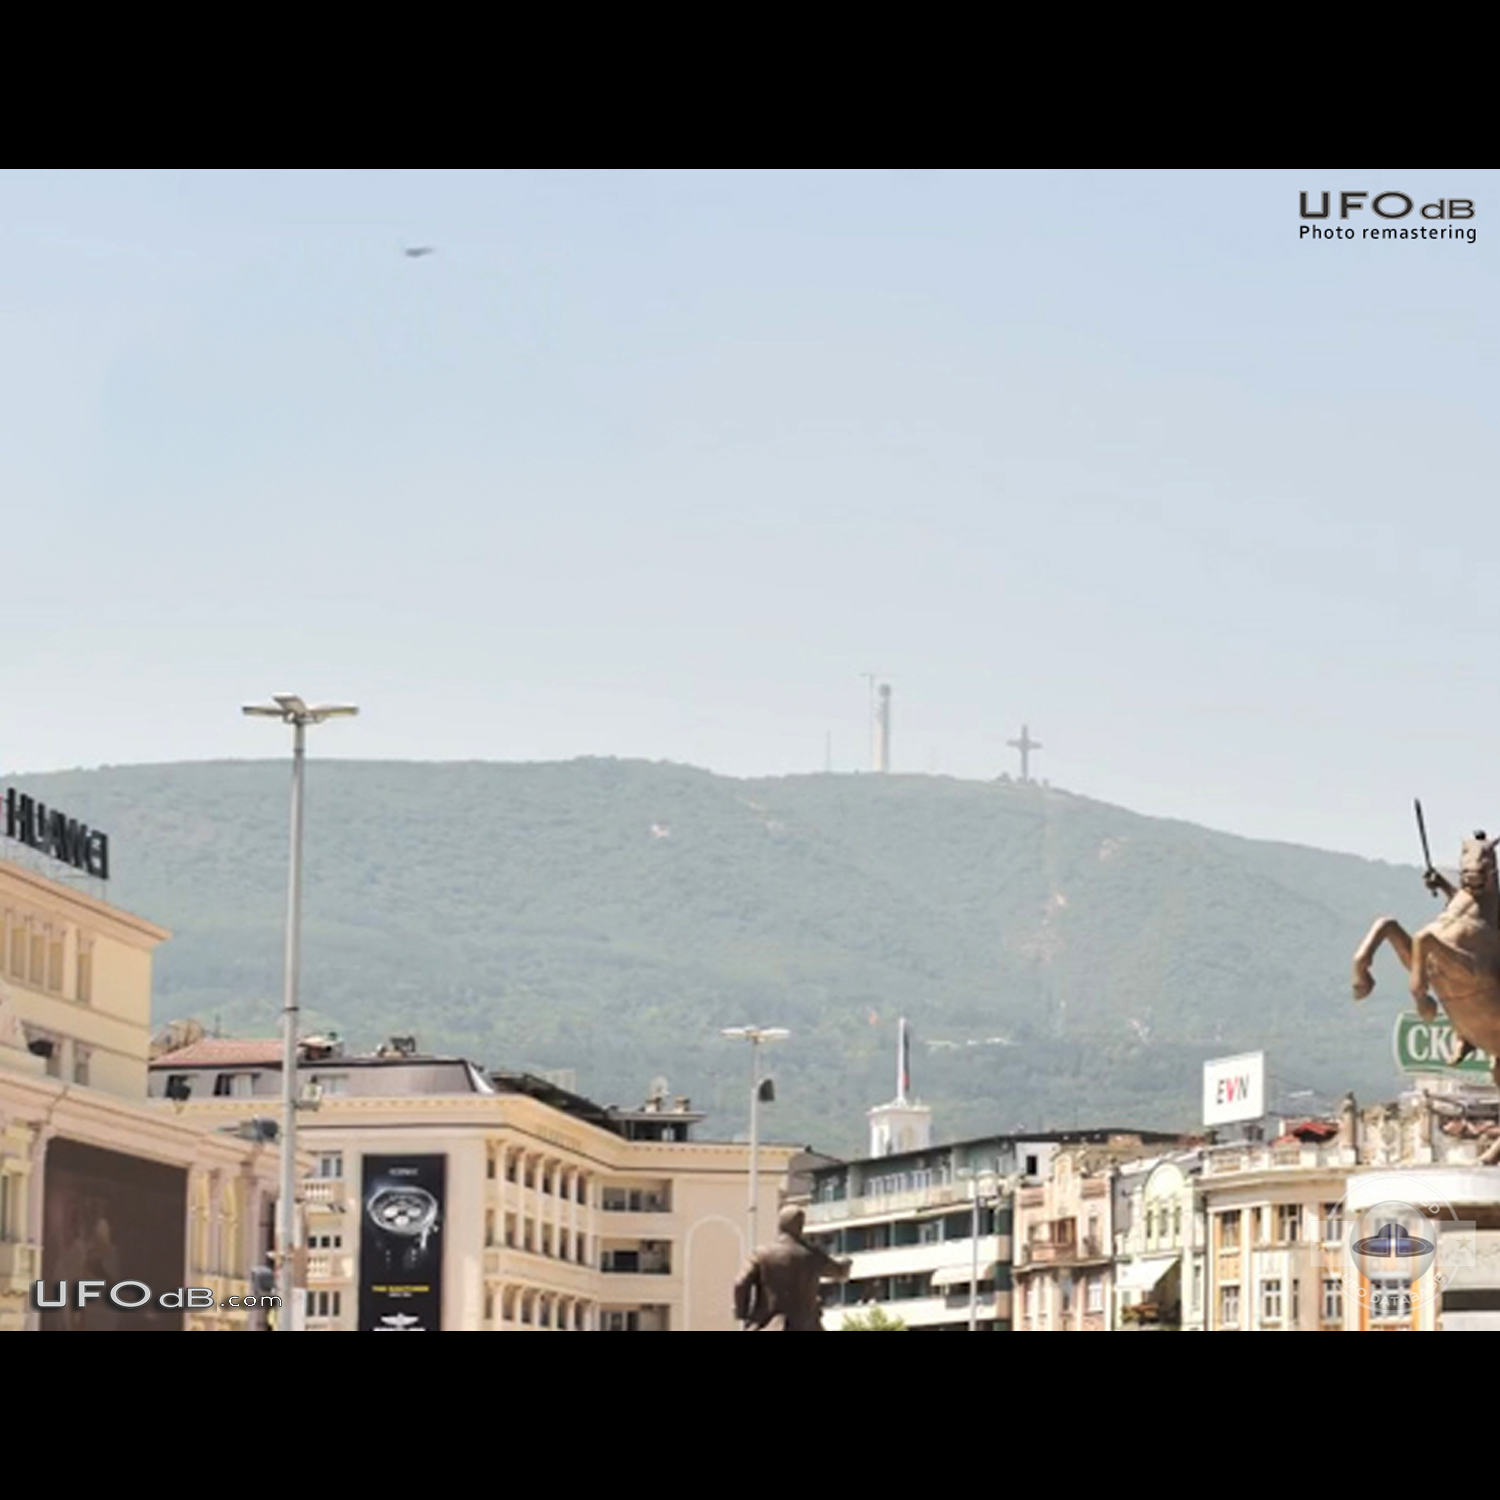 Triangular UFO passed over Warrior on a horse statue in Skopje Macedon UFO Picture #847-1